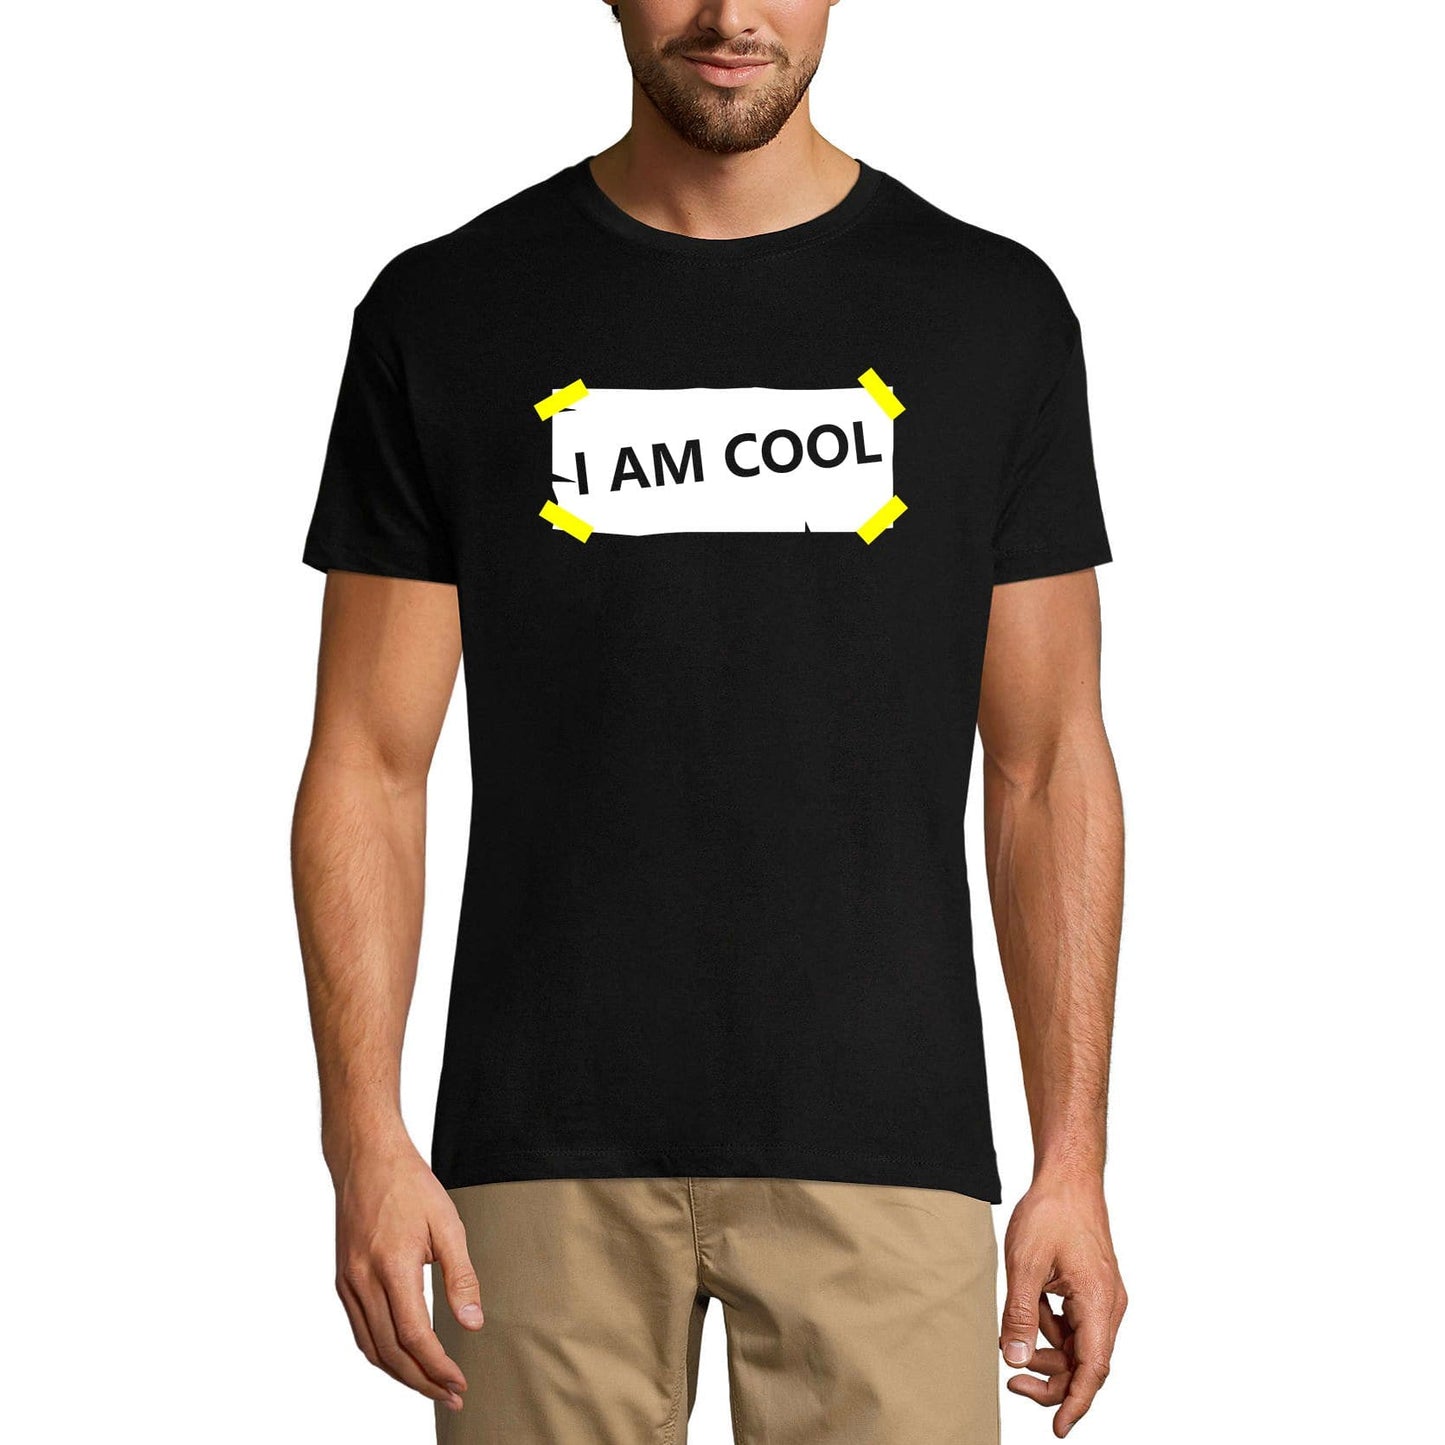 ULTRABASIC Men's Graphic T-Shirt I Am Cool - Awesome Funny Shirt for Father